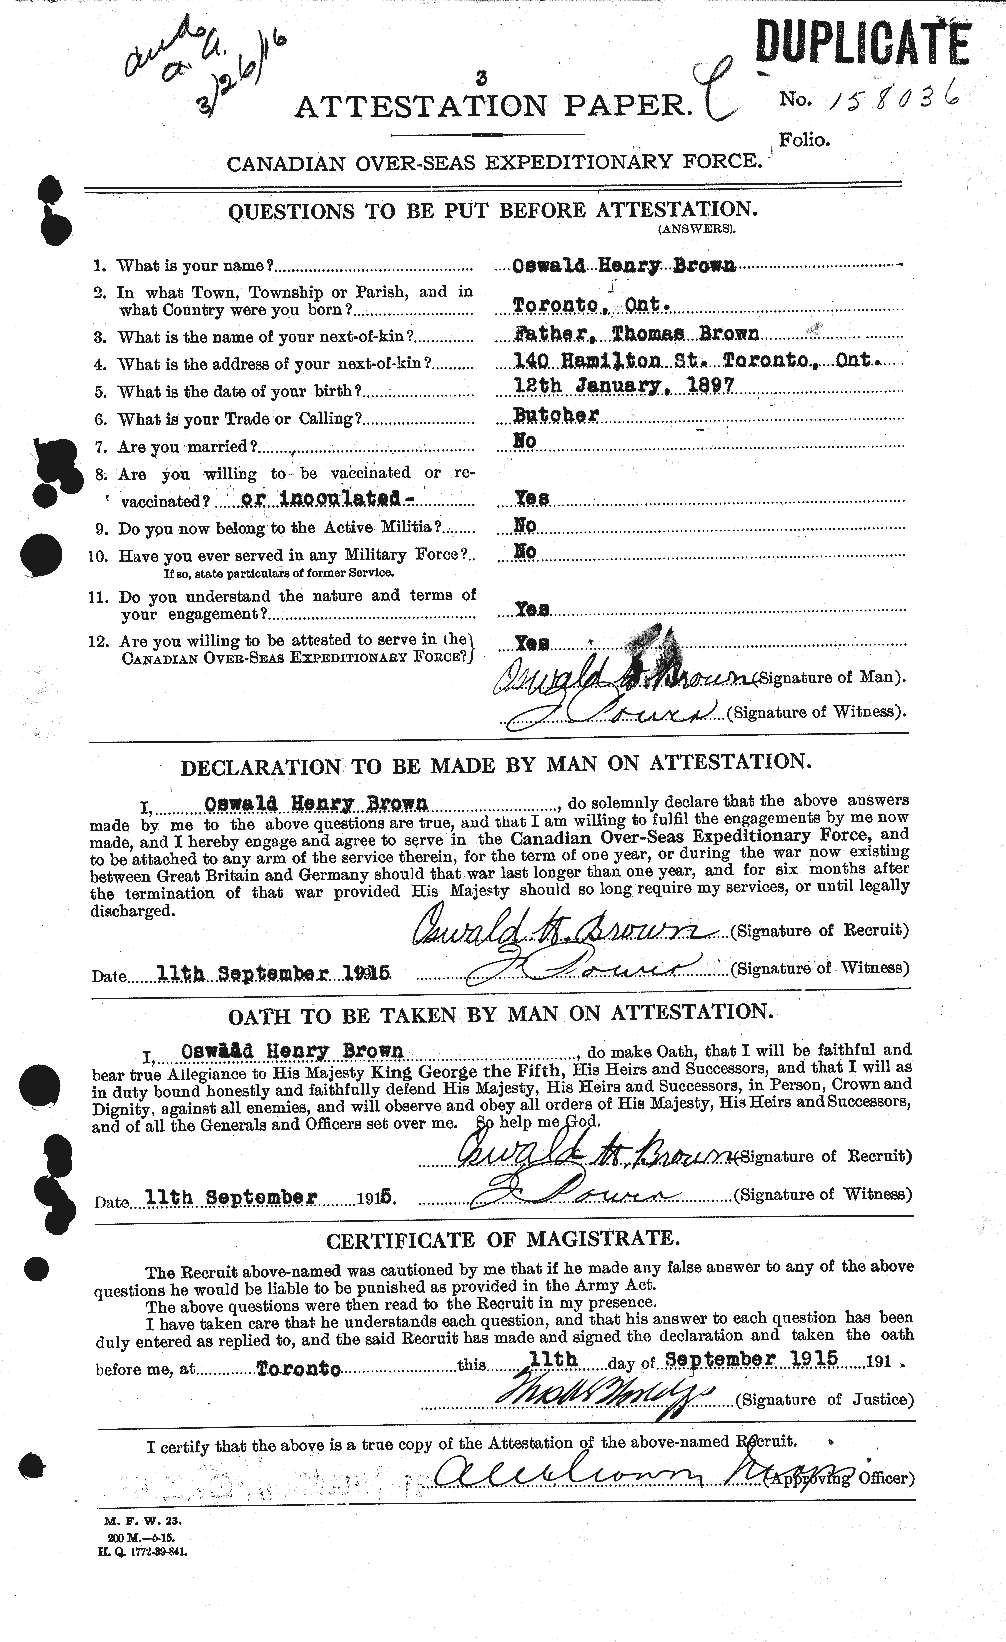 Personnel Records of the First World War - CEF 267142a